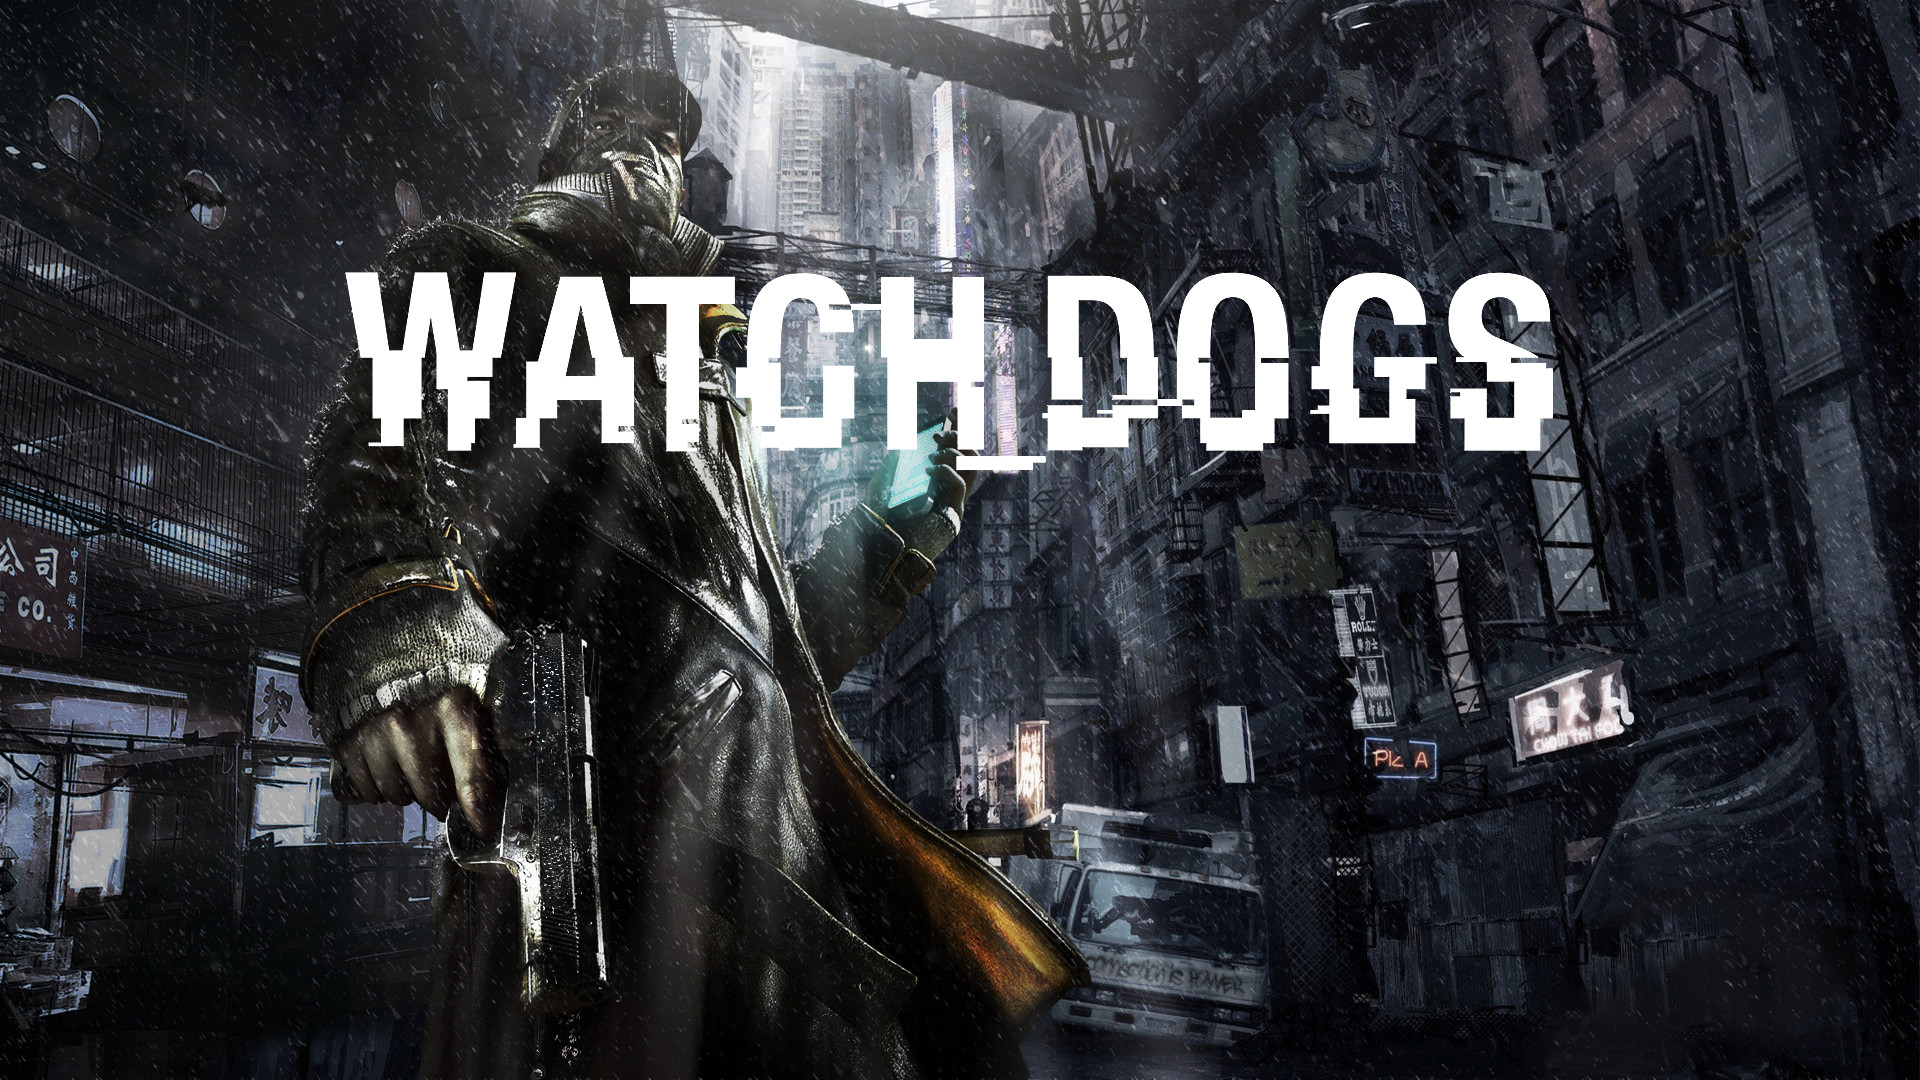 1920x1080 Watch Dogs HD Wallpaper | Background Image |  | ID:386016 -  Wallpaper Abyss